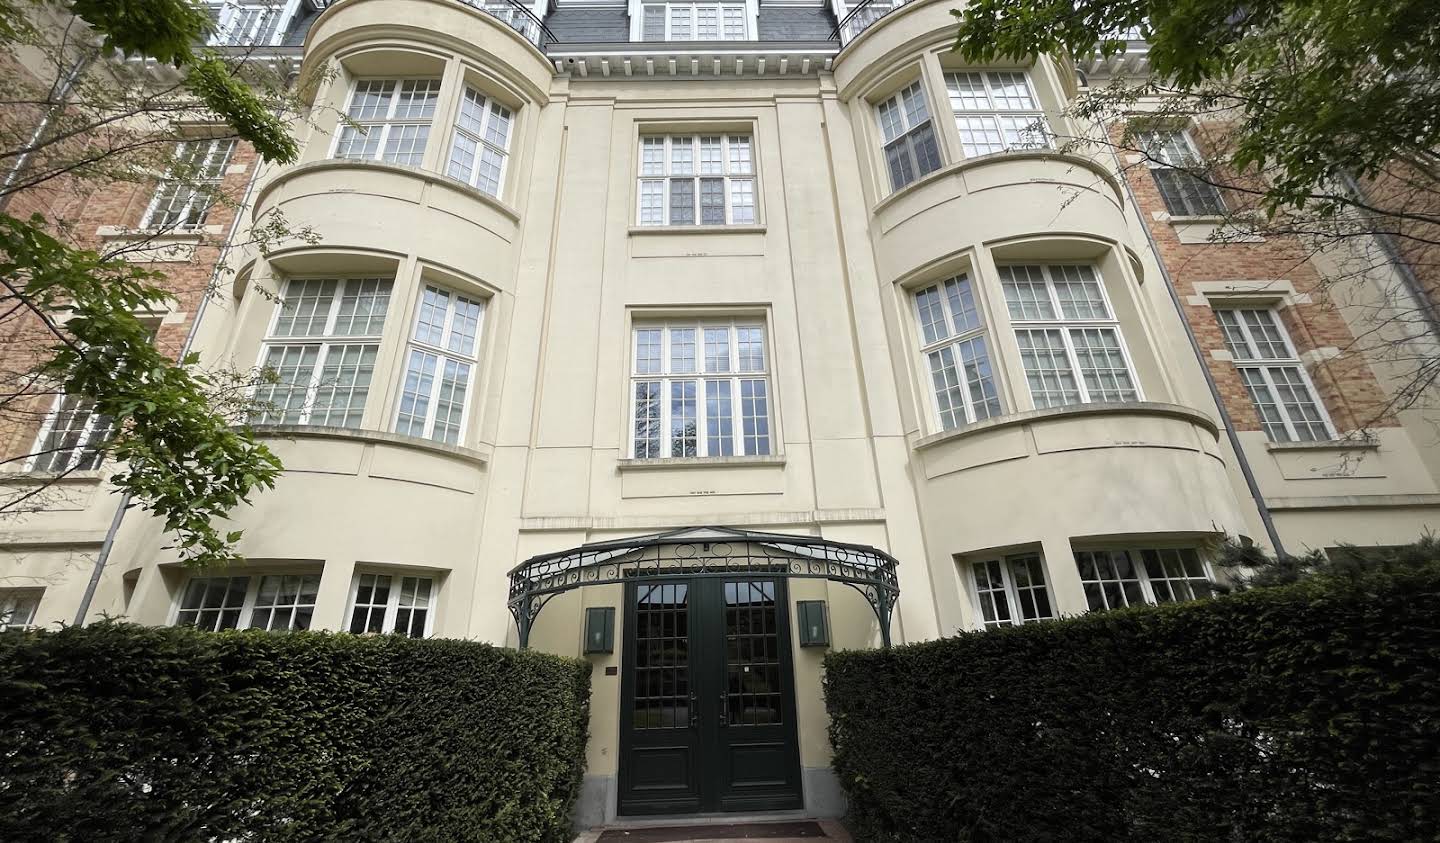 Appartement Uccle